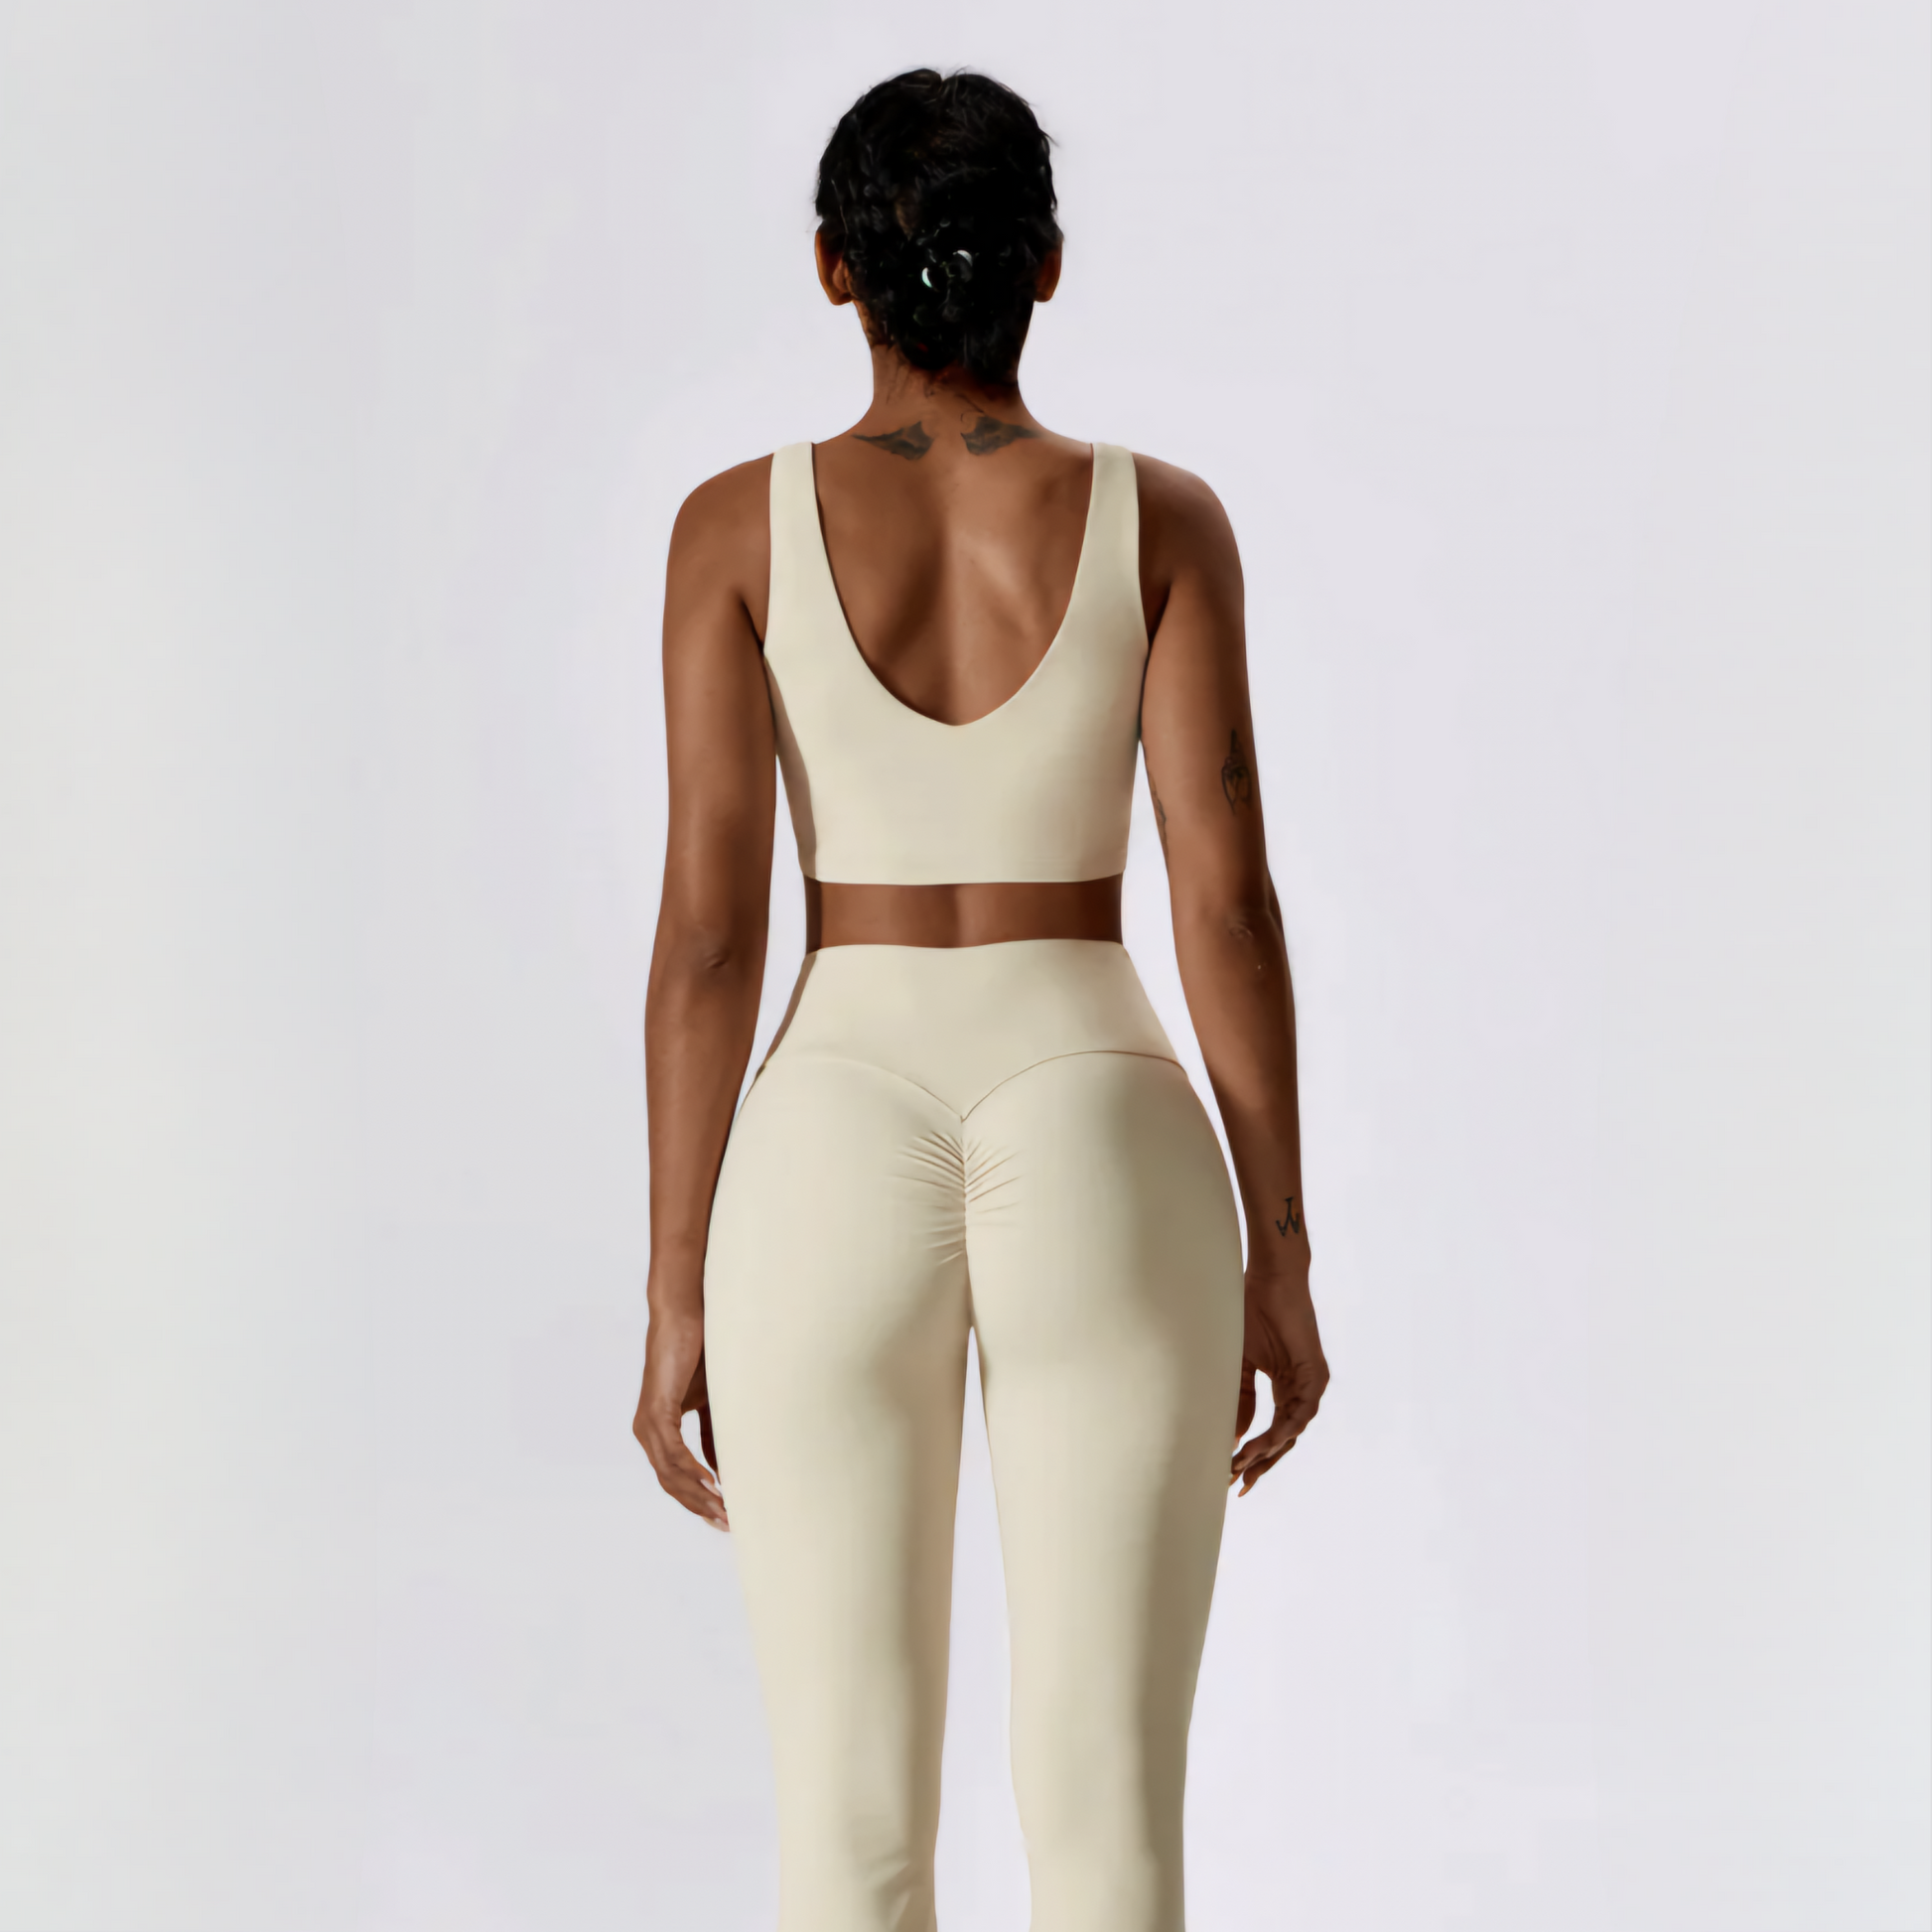 Back shot of fitness model showcasing the ruching and booty popping effect of the Natalia matching workout set from Vibras Activewear.